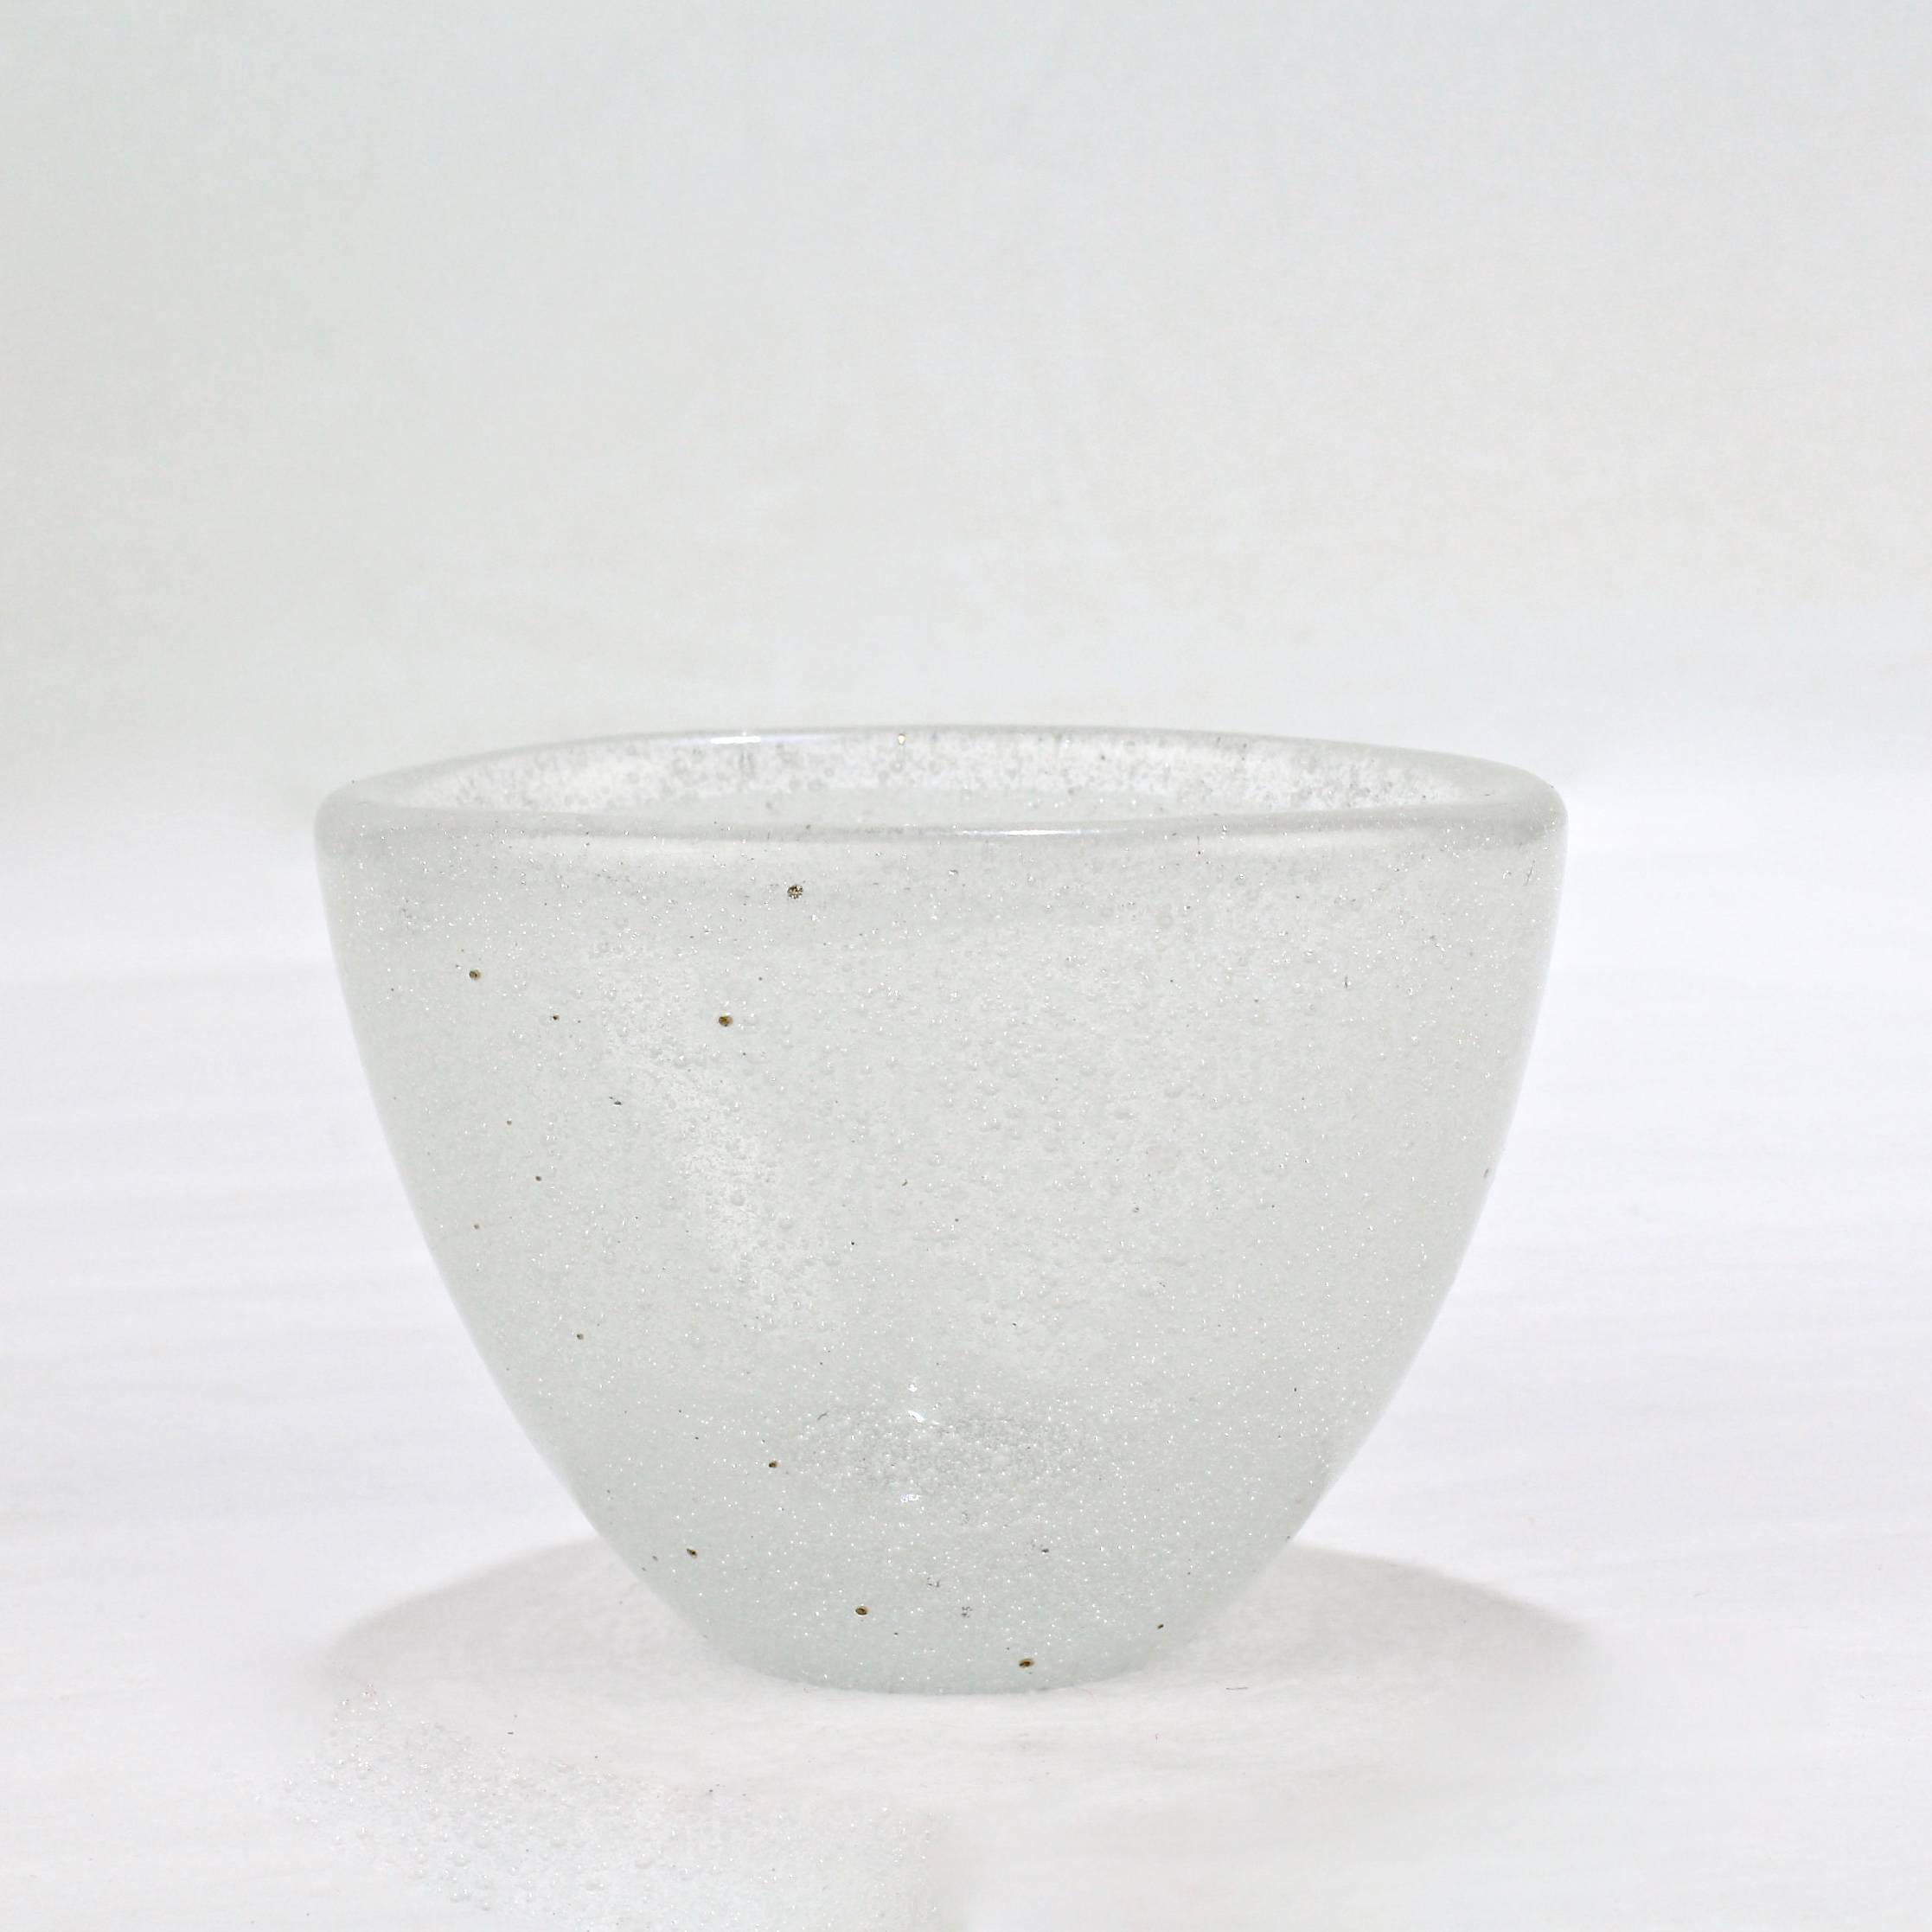 A fine, diminutive white Pulegoso vase. 

Designed by Carlo Scarpa and produced by Venini.

Base bears a two line acid etched factory mark.

Measures: Width ca. 3 1/4 in.

Items purchased from David Sterner antiques must delight you.